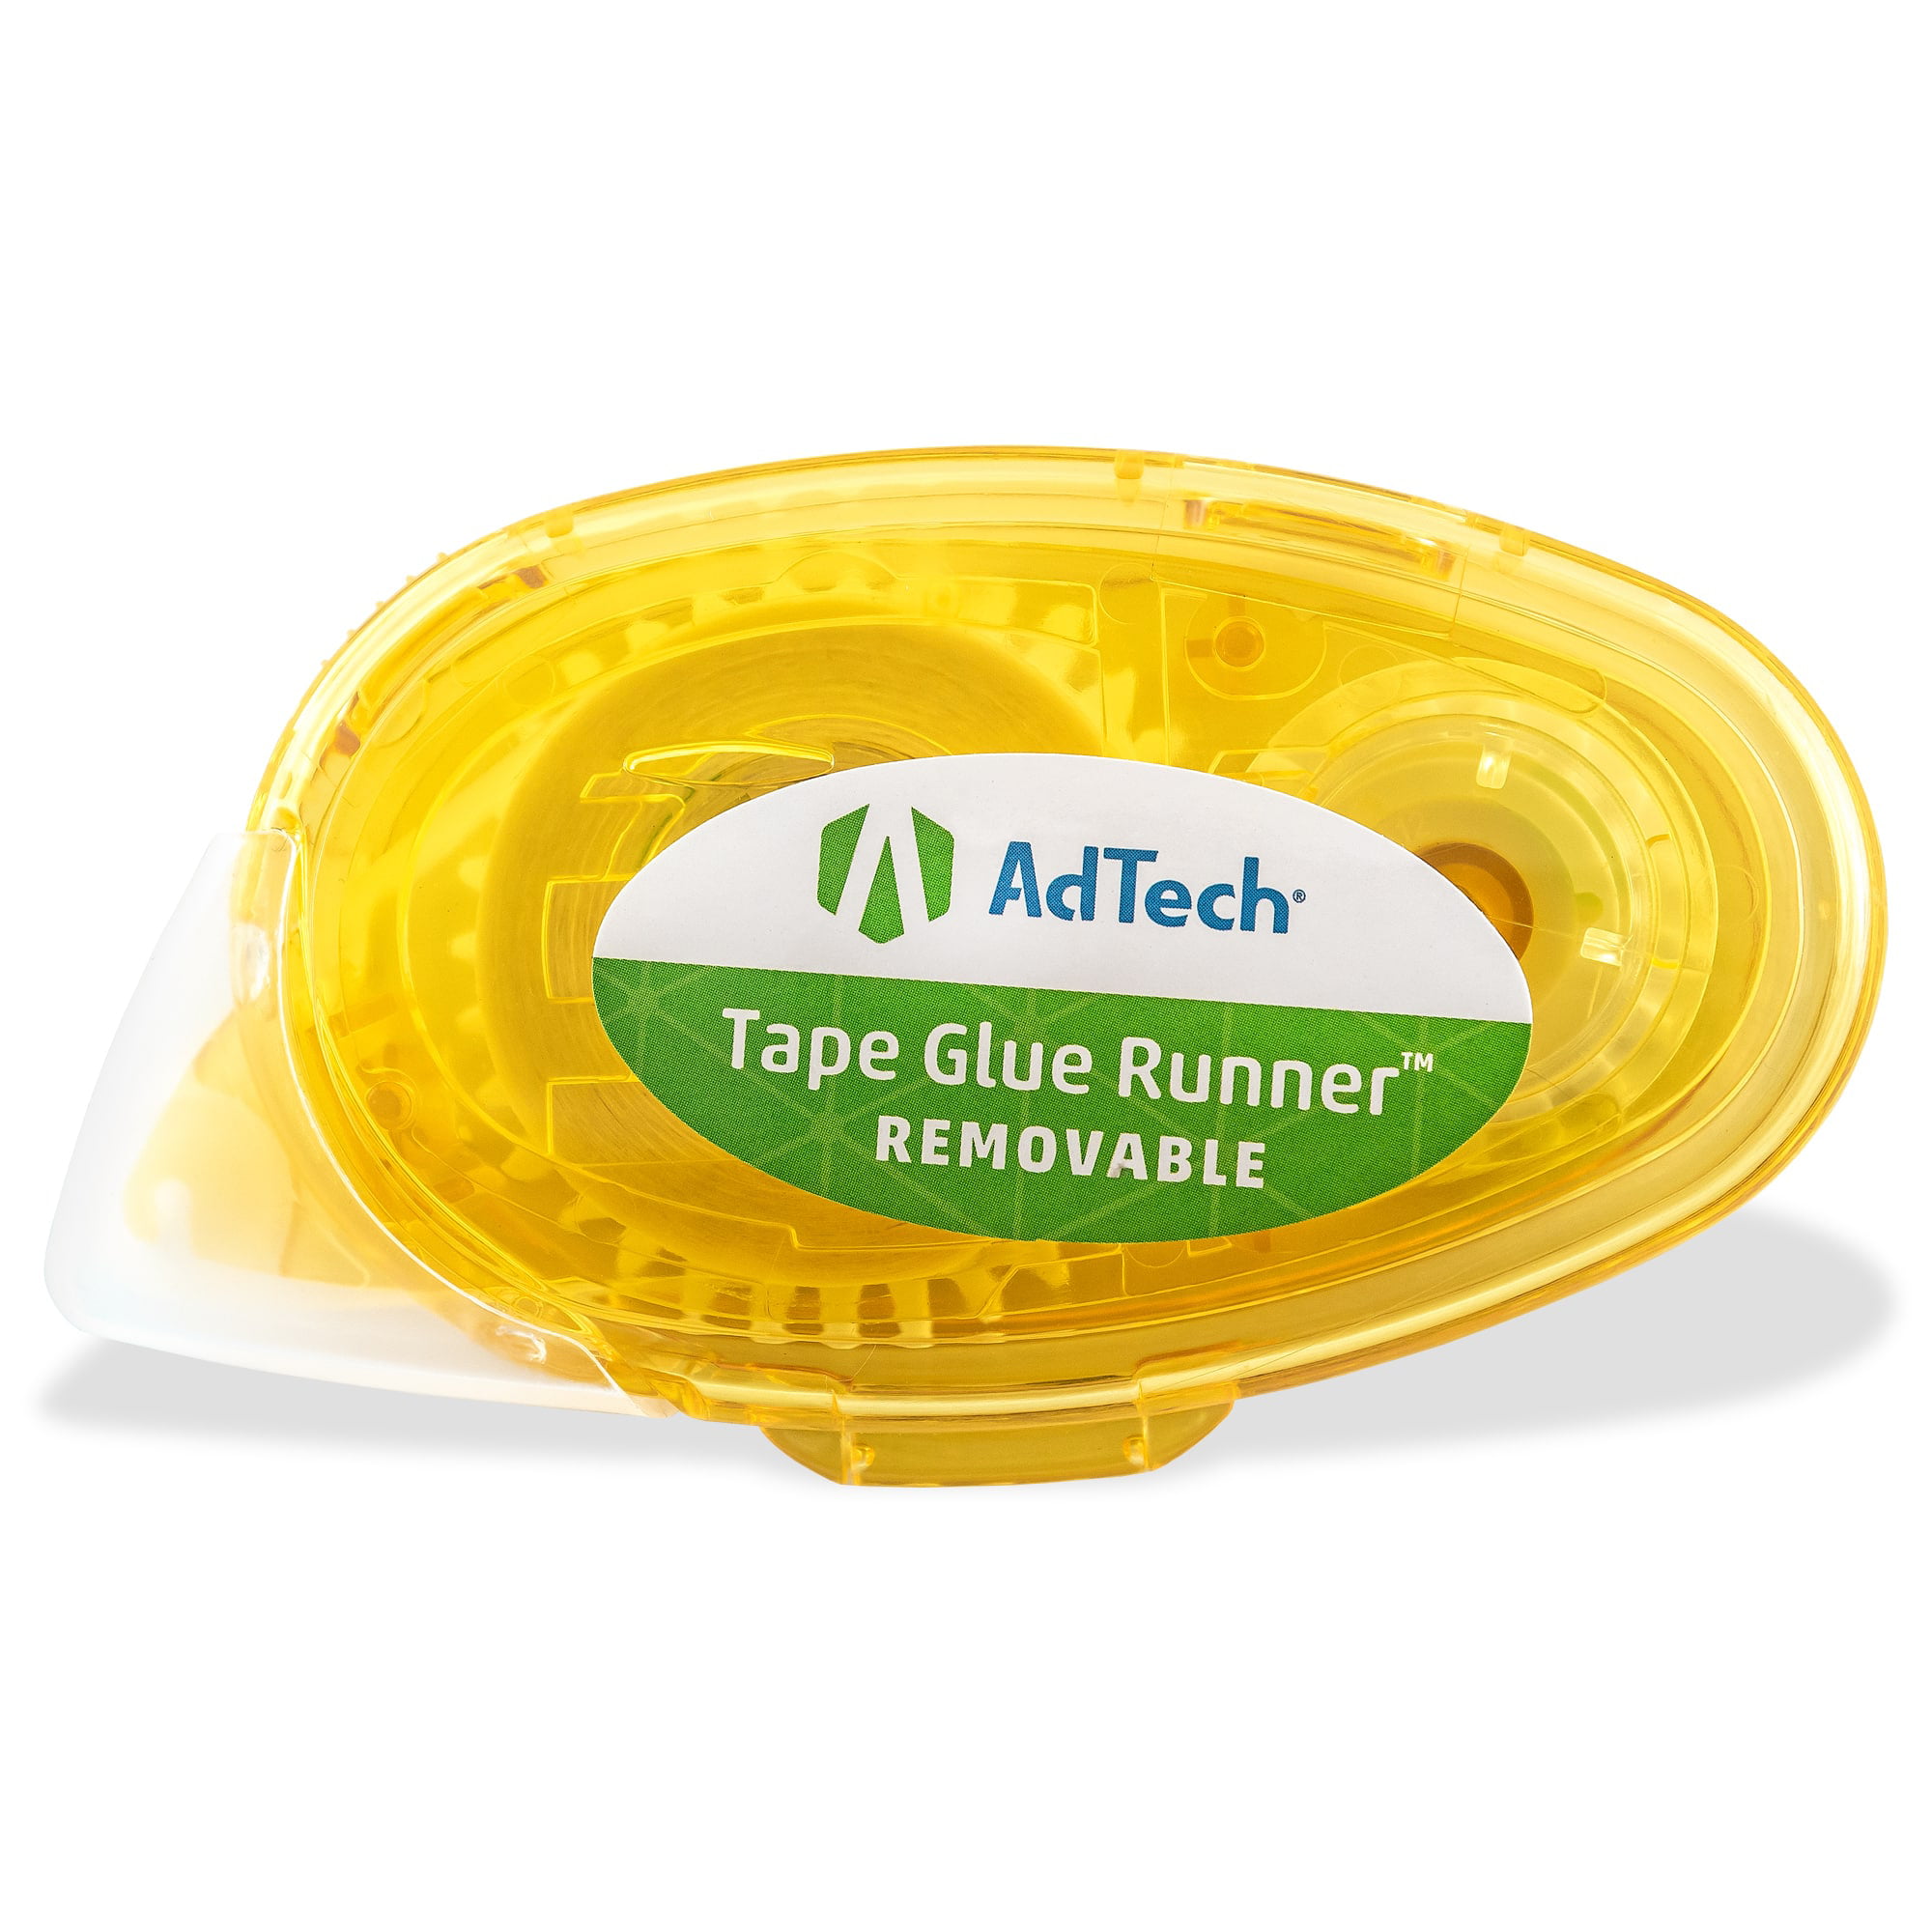 AdTech® Removable Tape Glue Runner™, 4ct.